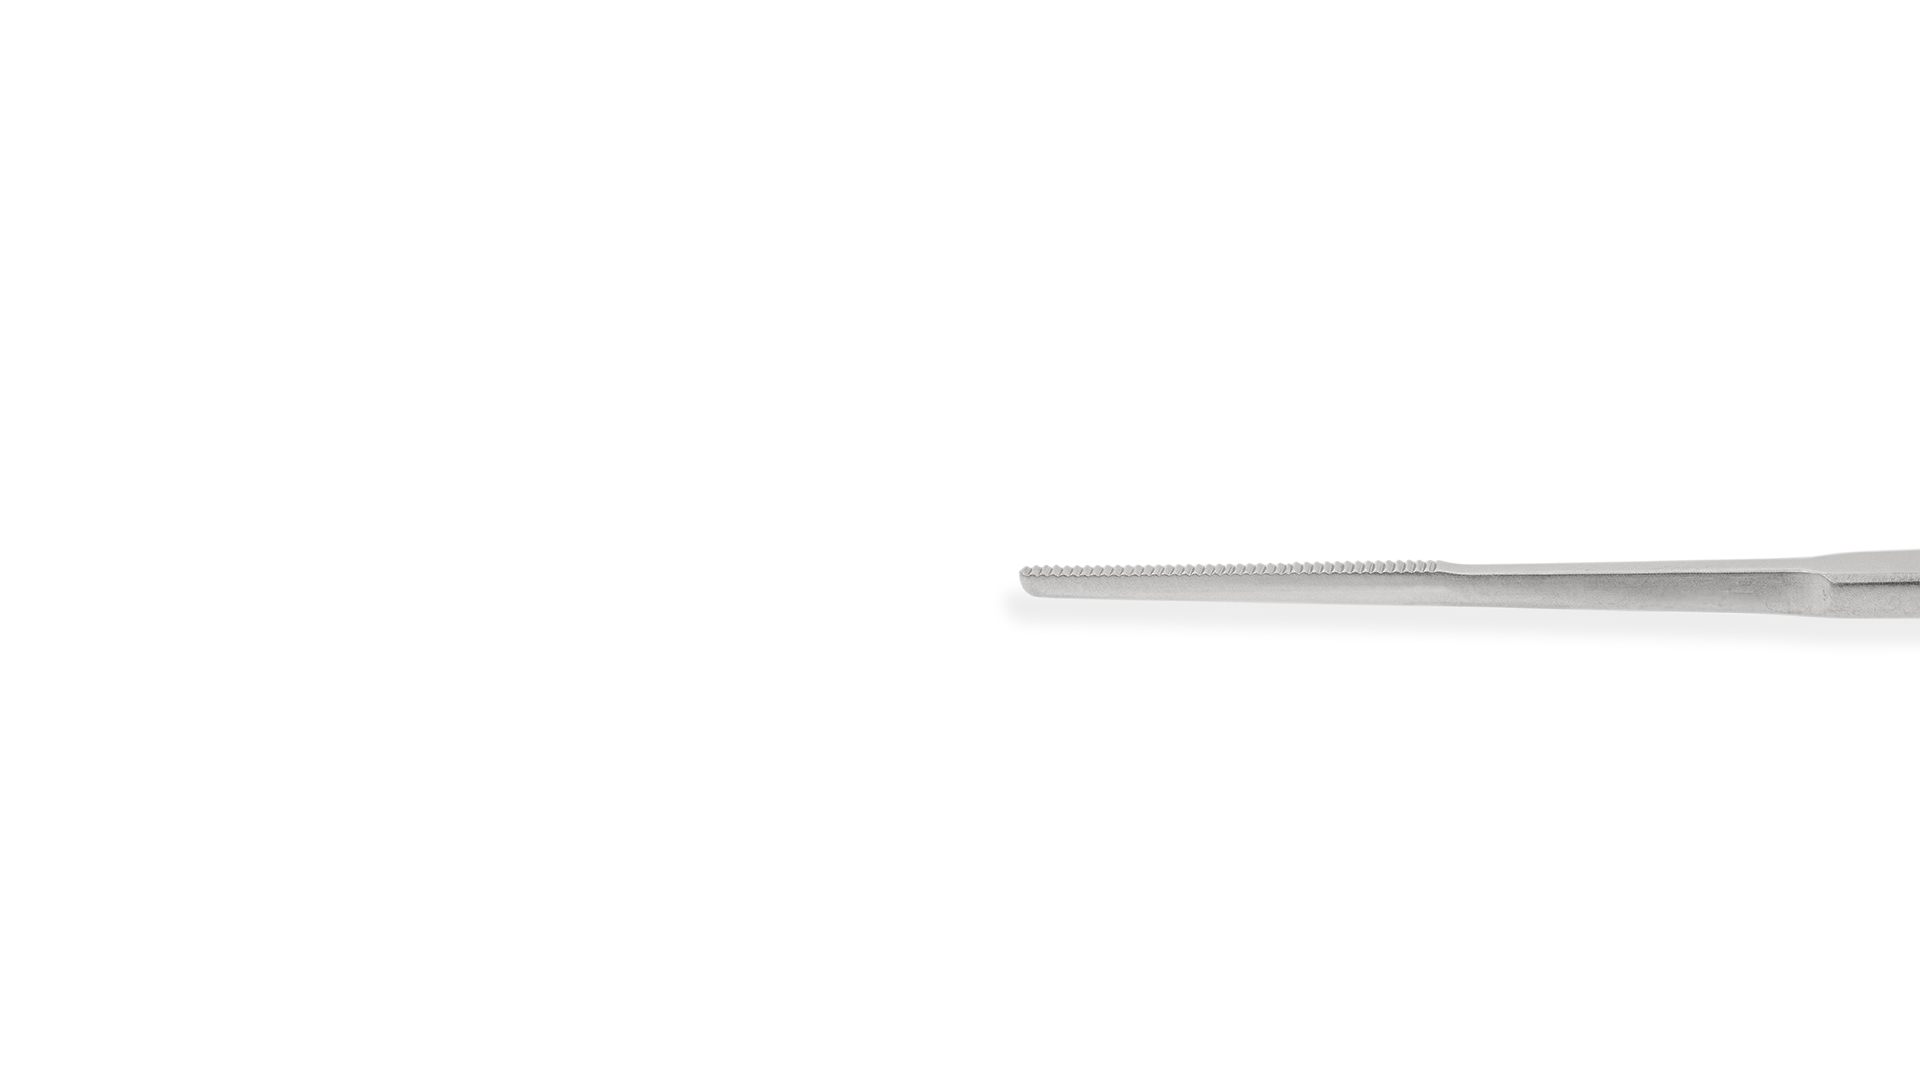 Gerald Forceps - Straight 1.5mm serrated tips